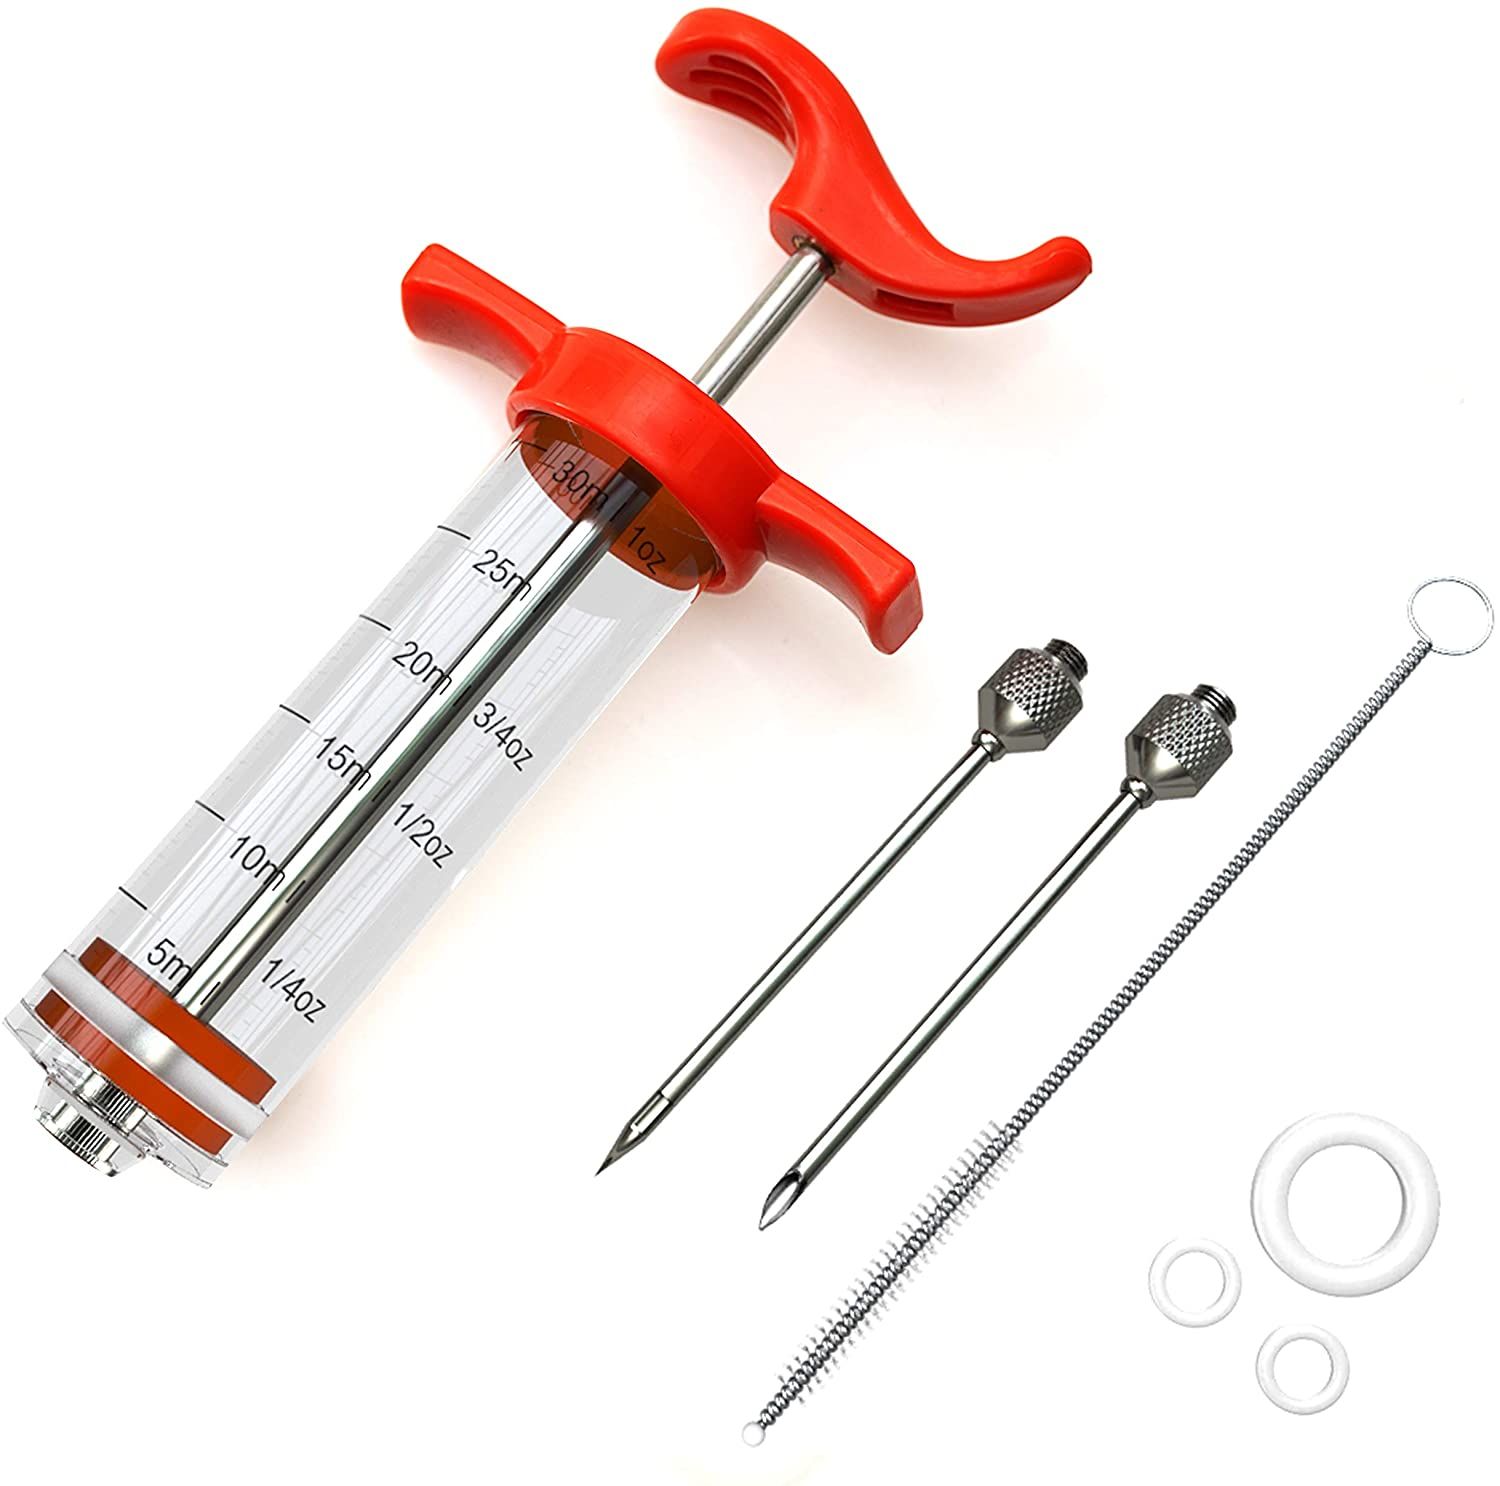 Meat Injector Kit